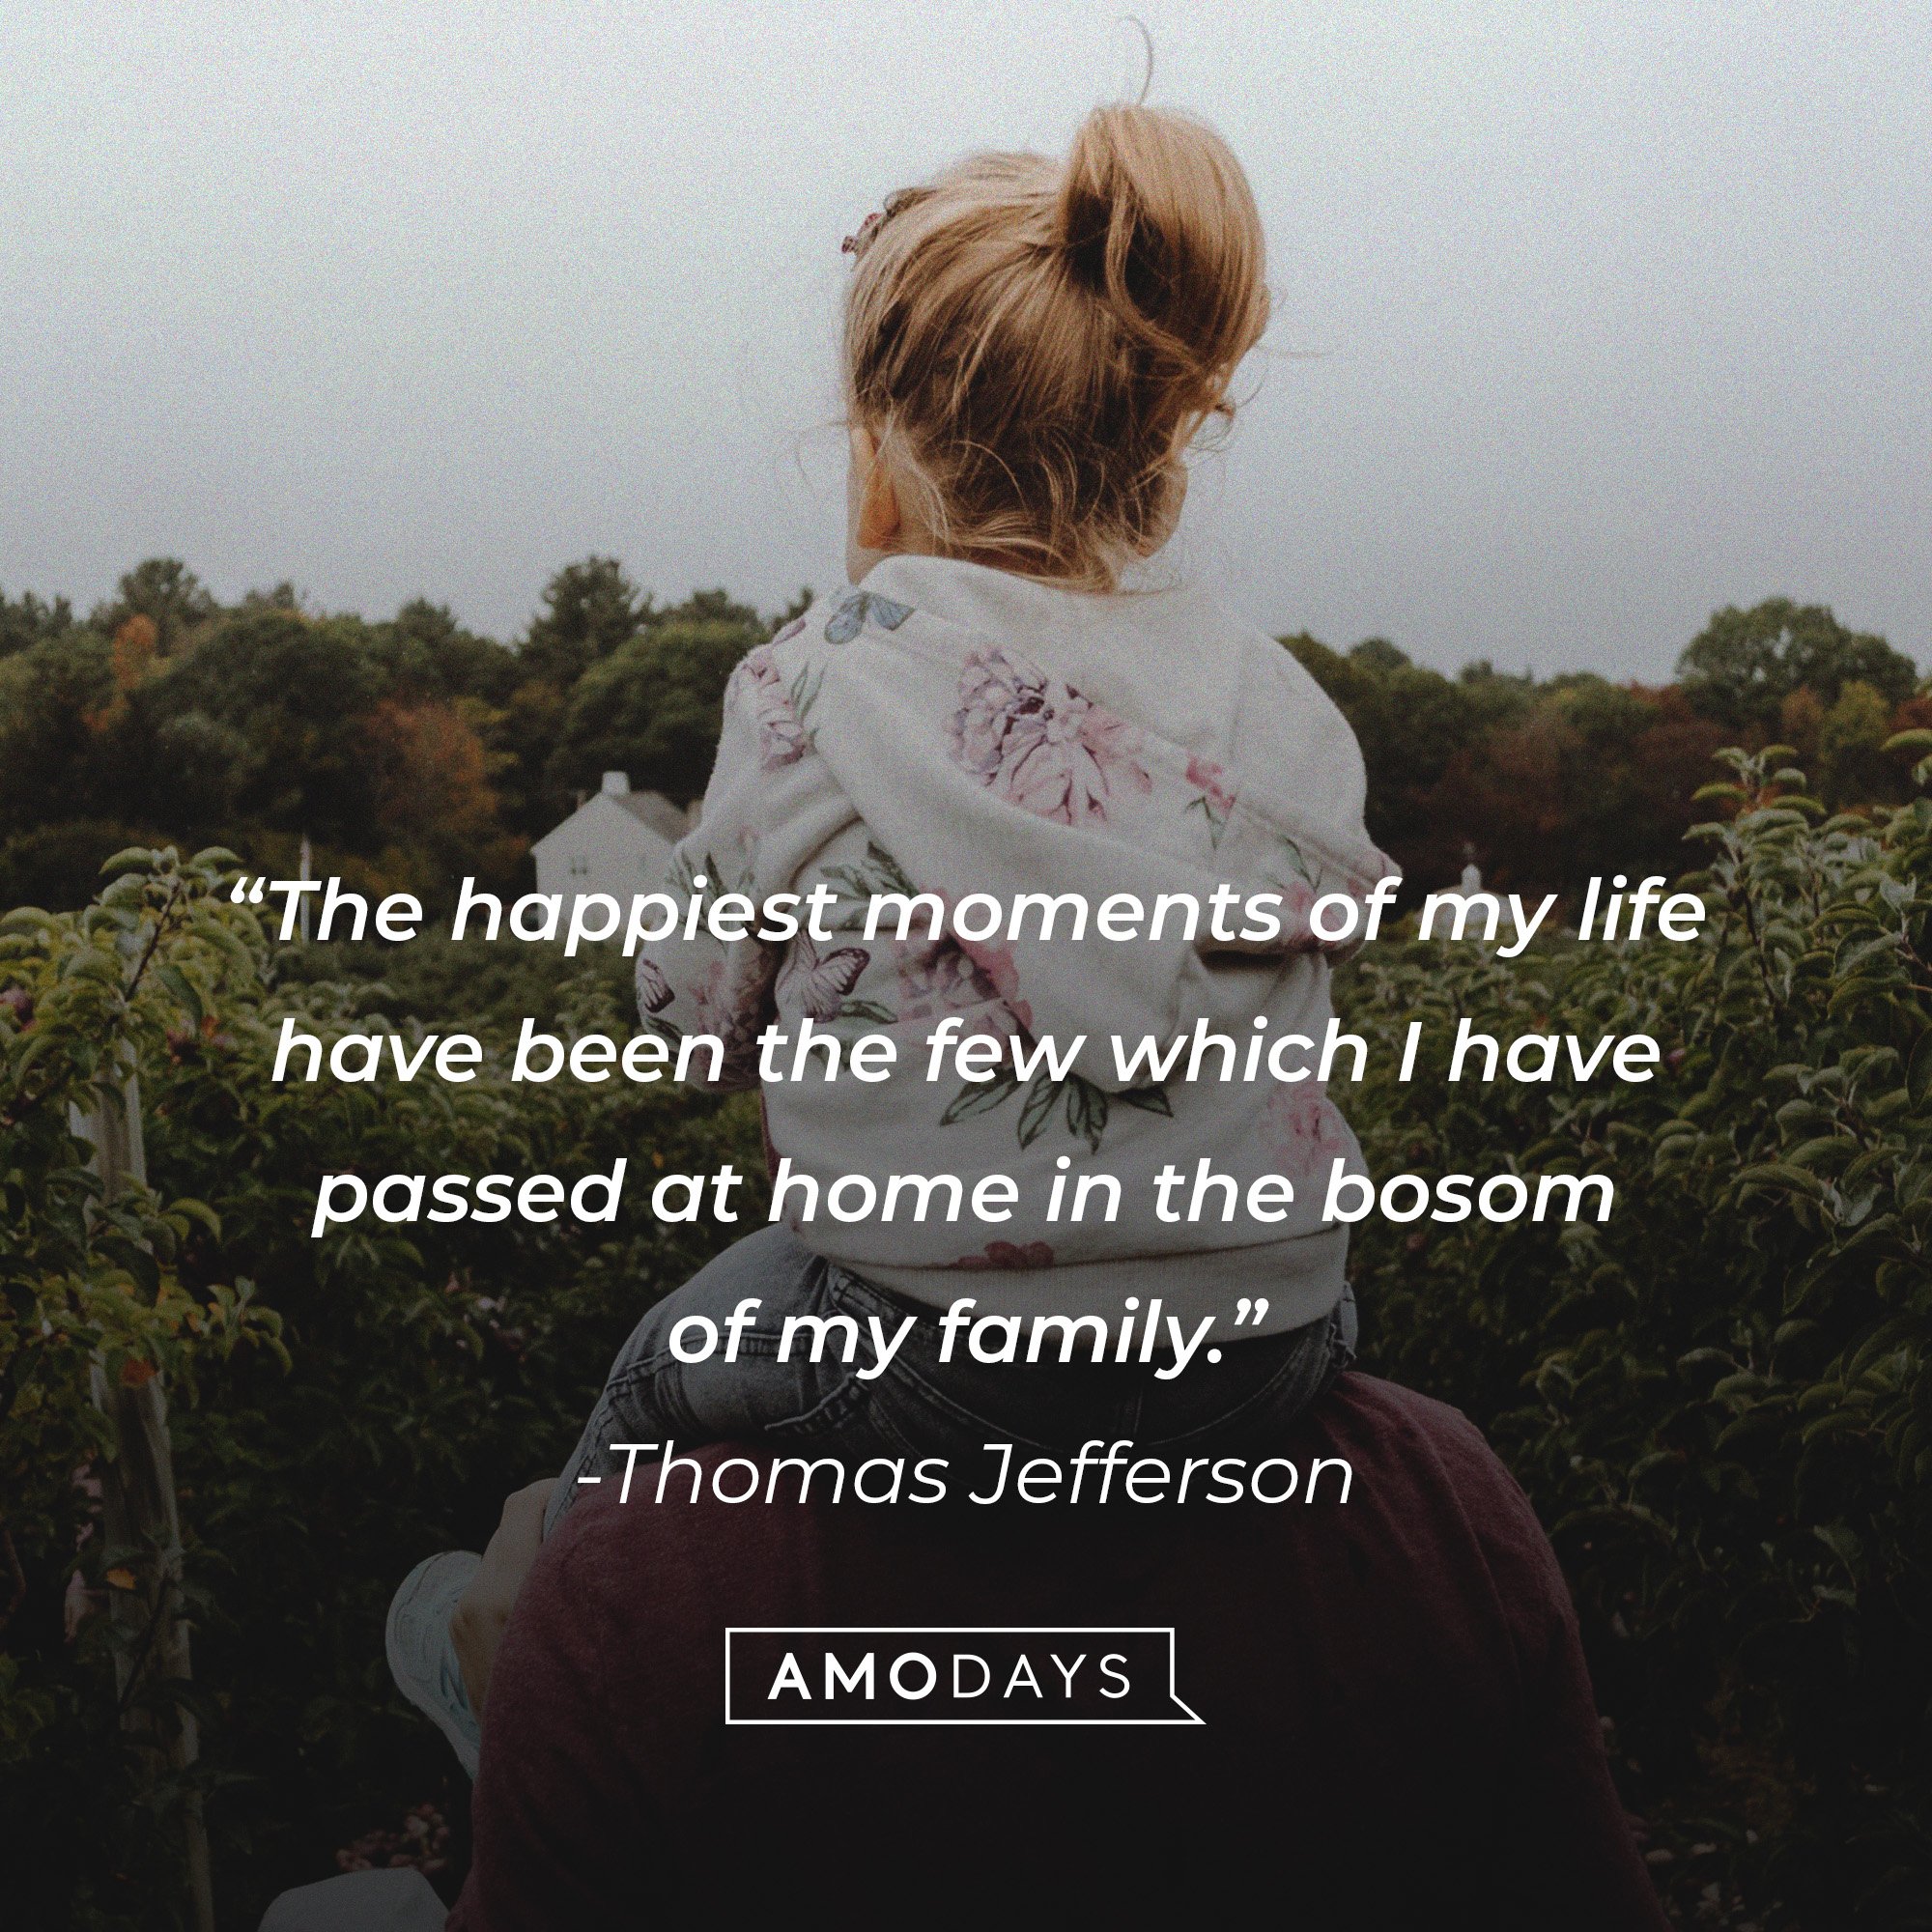 Thomas Jefferson's quote: “The happiest moments of my life have been the few which I have passed at home in the bosom of my family.” | Image: AmoDays